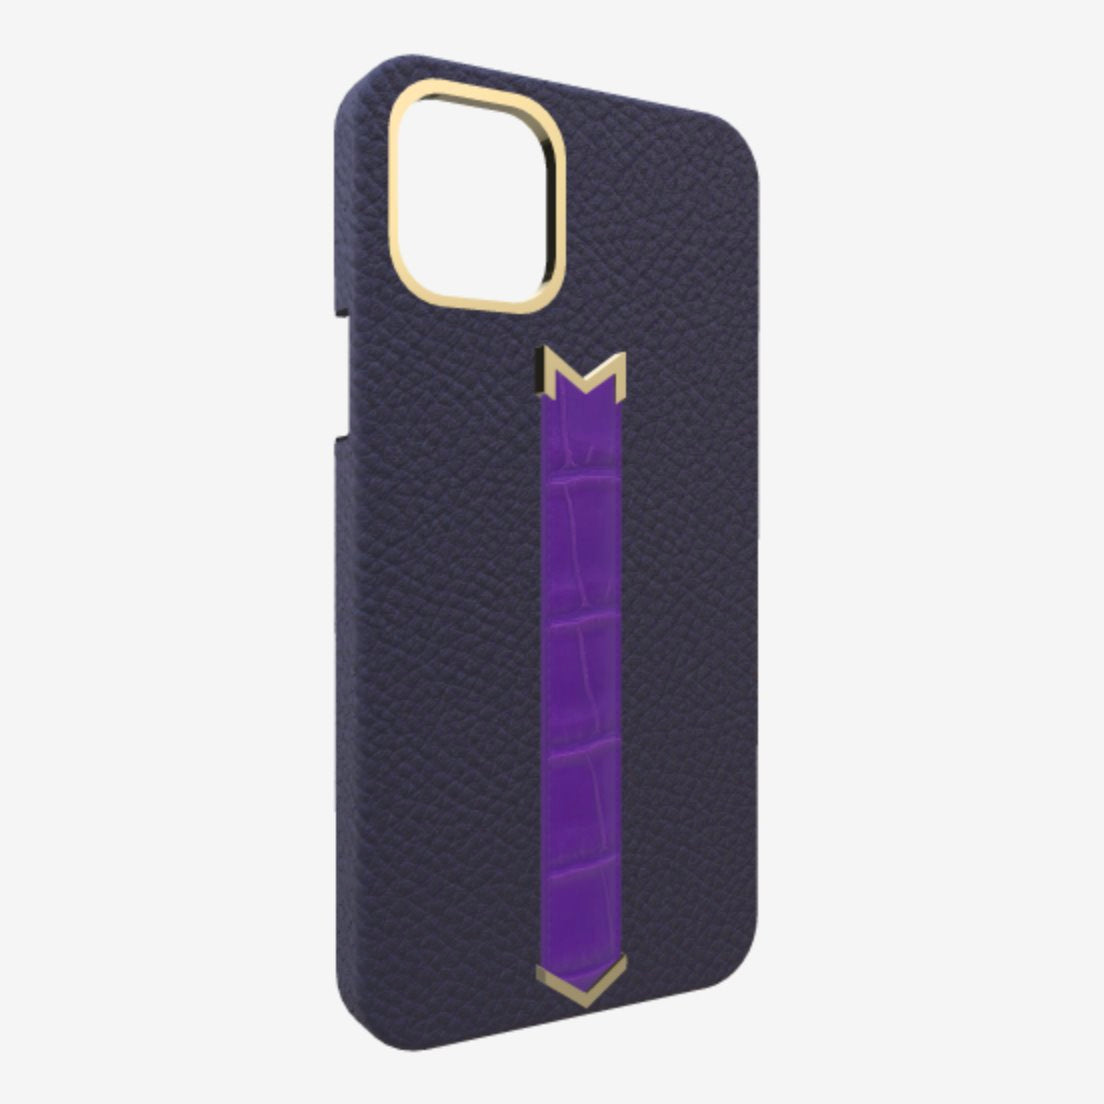 Gold Finger Strap Case for iPhone 13 Pro Max in Genuine Calfskin and Alligator Navy Blue Purple Rain 